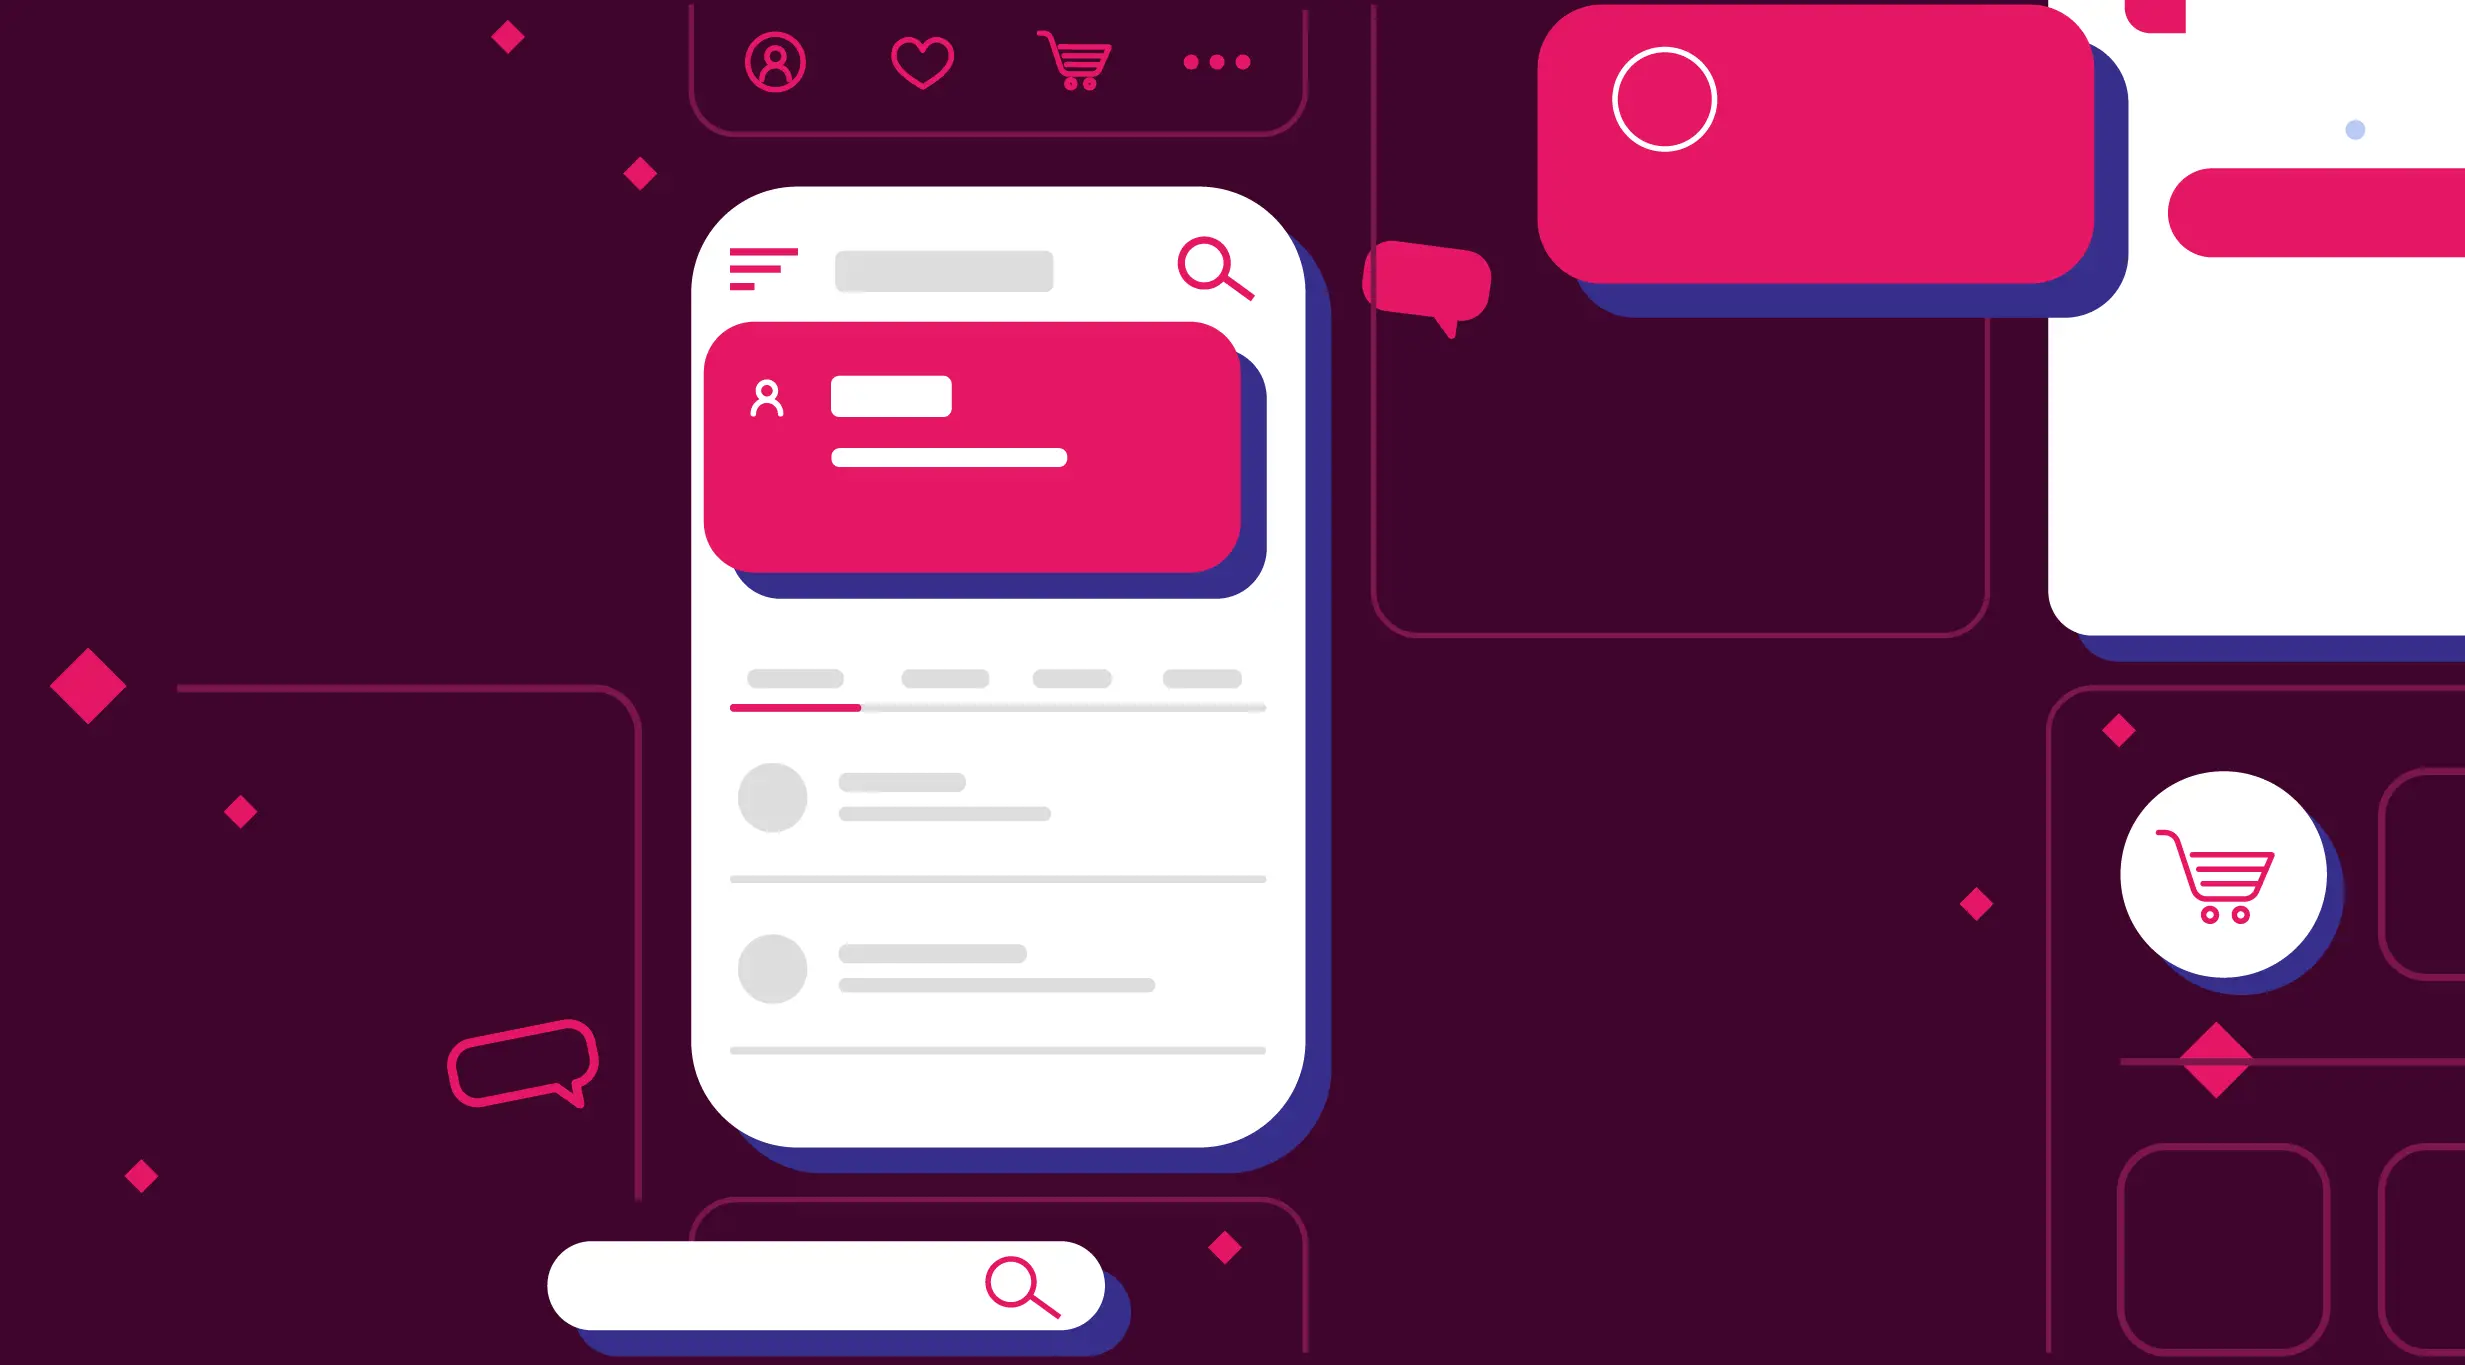 Illustration of a mobile app interface with icons and menu elements on a purple background